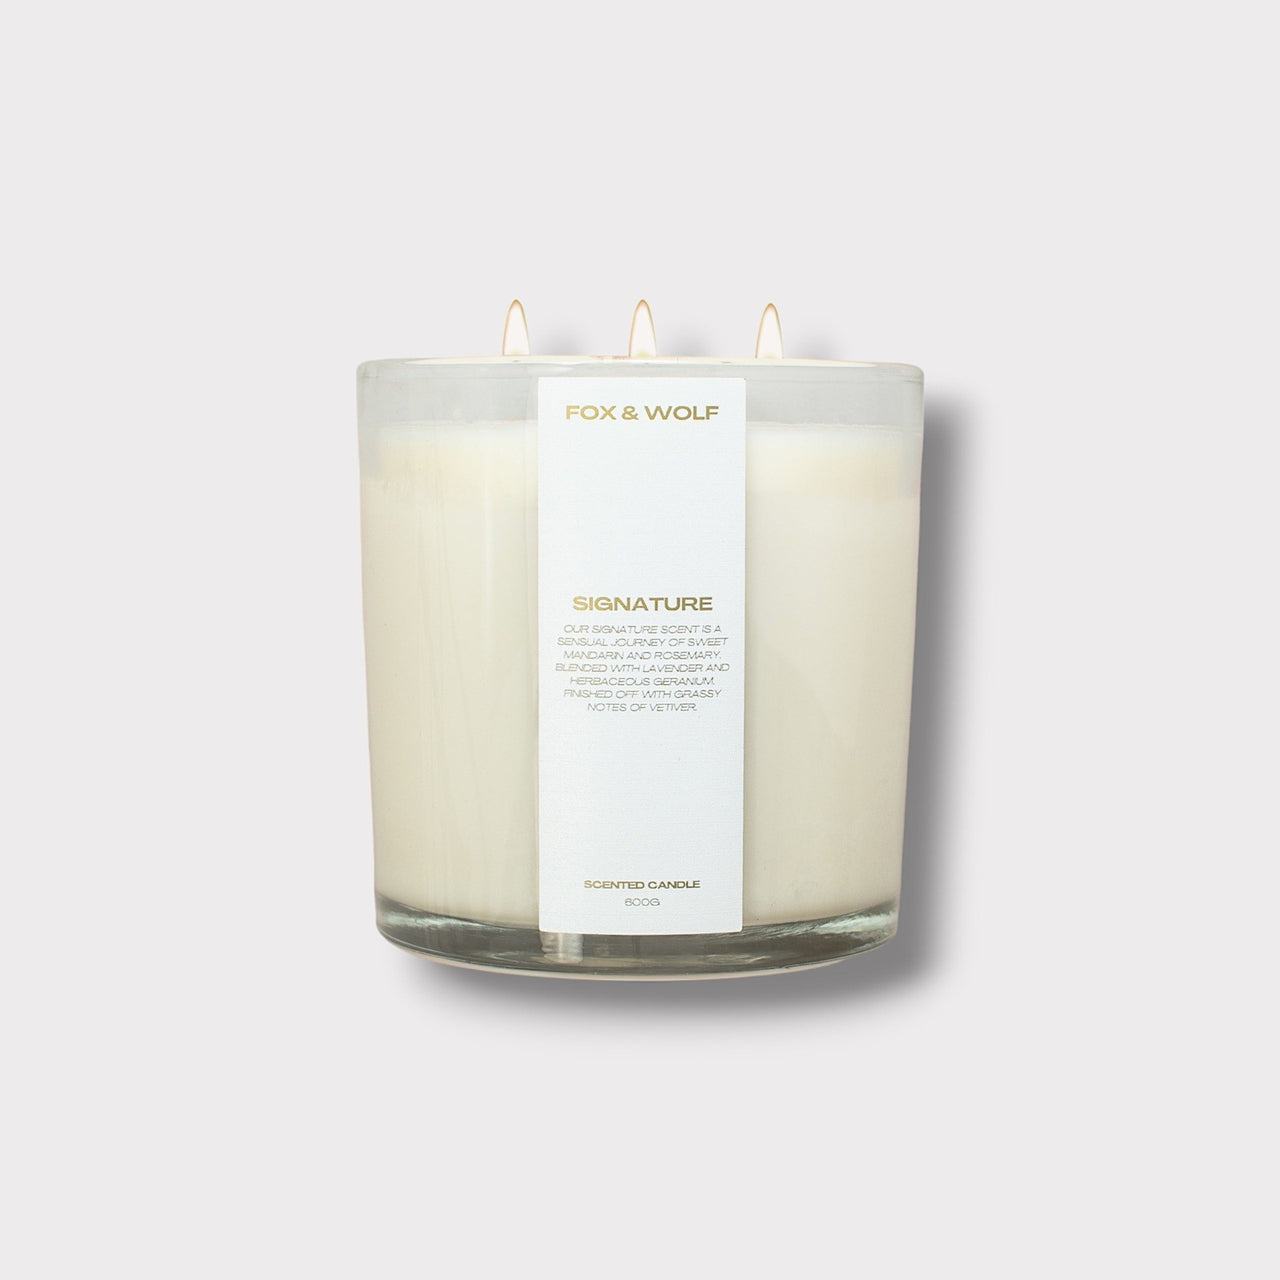 640 G 3 WICK SIGNATURE CANDLE